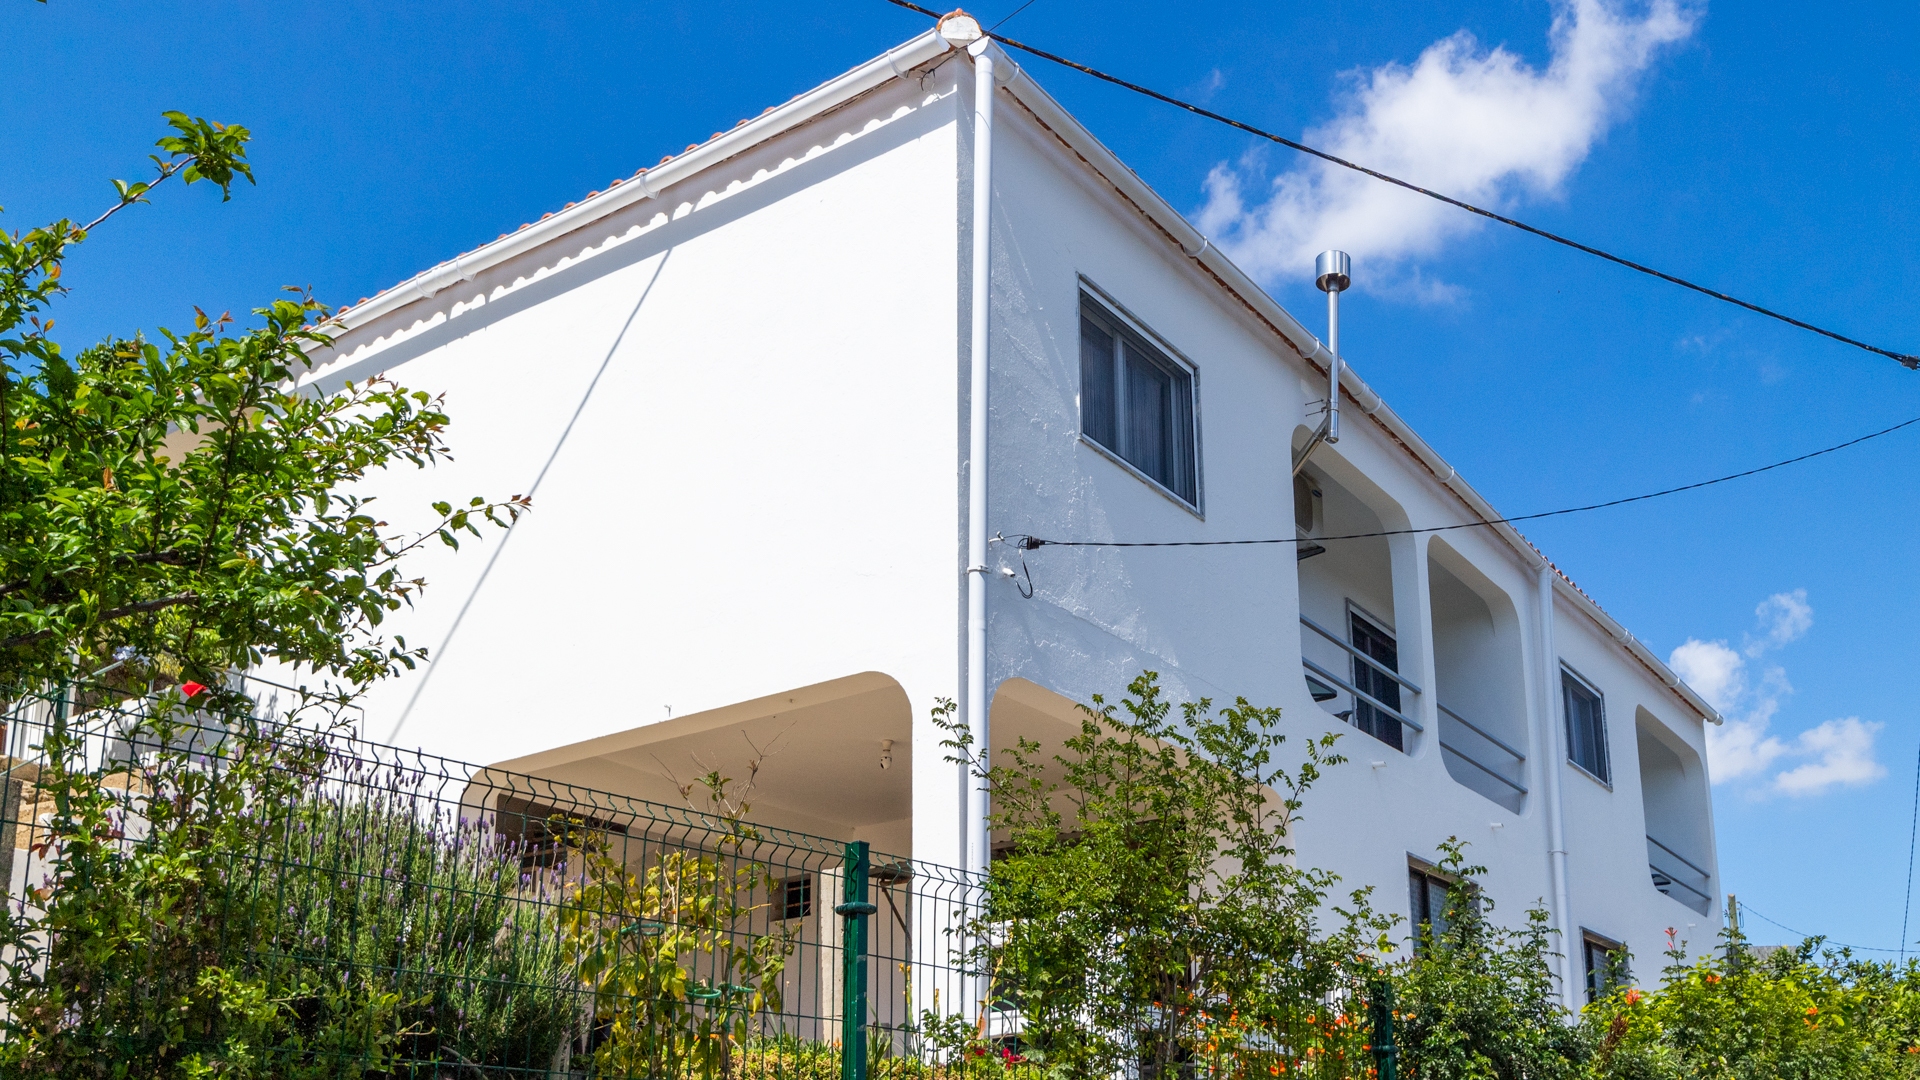 3 Bedroom Townhouse, recently Renovated, in the Heart of Odeleite, Castro Marim | TV1913 Detached, renovated house in Odeleite with garage, balcony terraces with country views, and a terraced garden within a few minutes’ walk of the town centre.